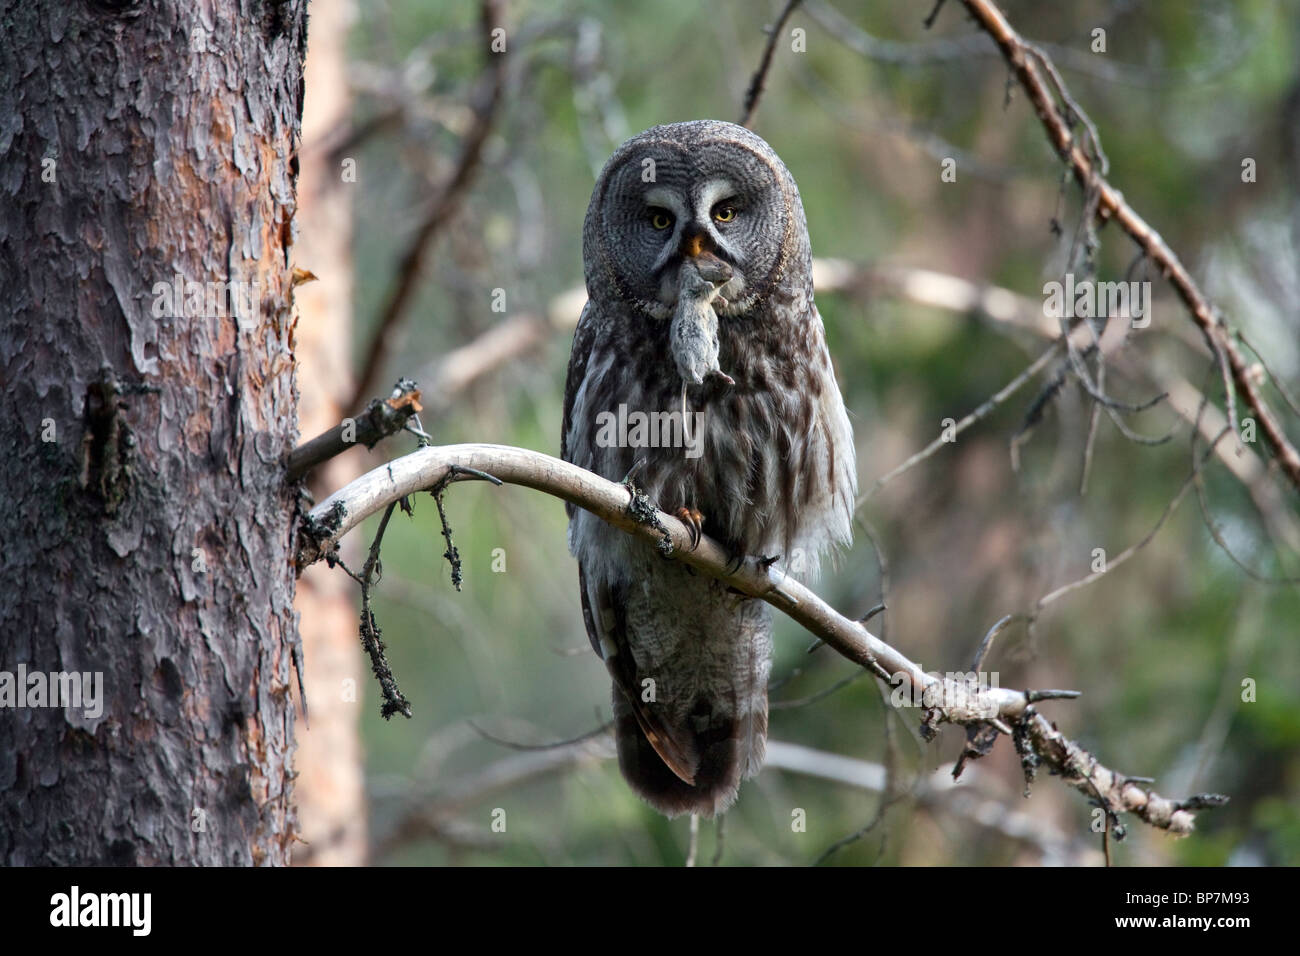 Great grey owl (Strix nebulosa) perched on branch in boreal forest with mouse, Sweden Stock Photo